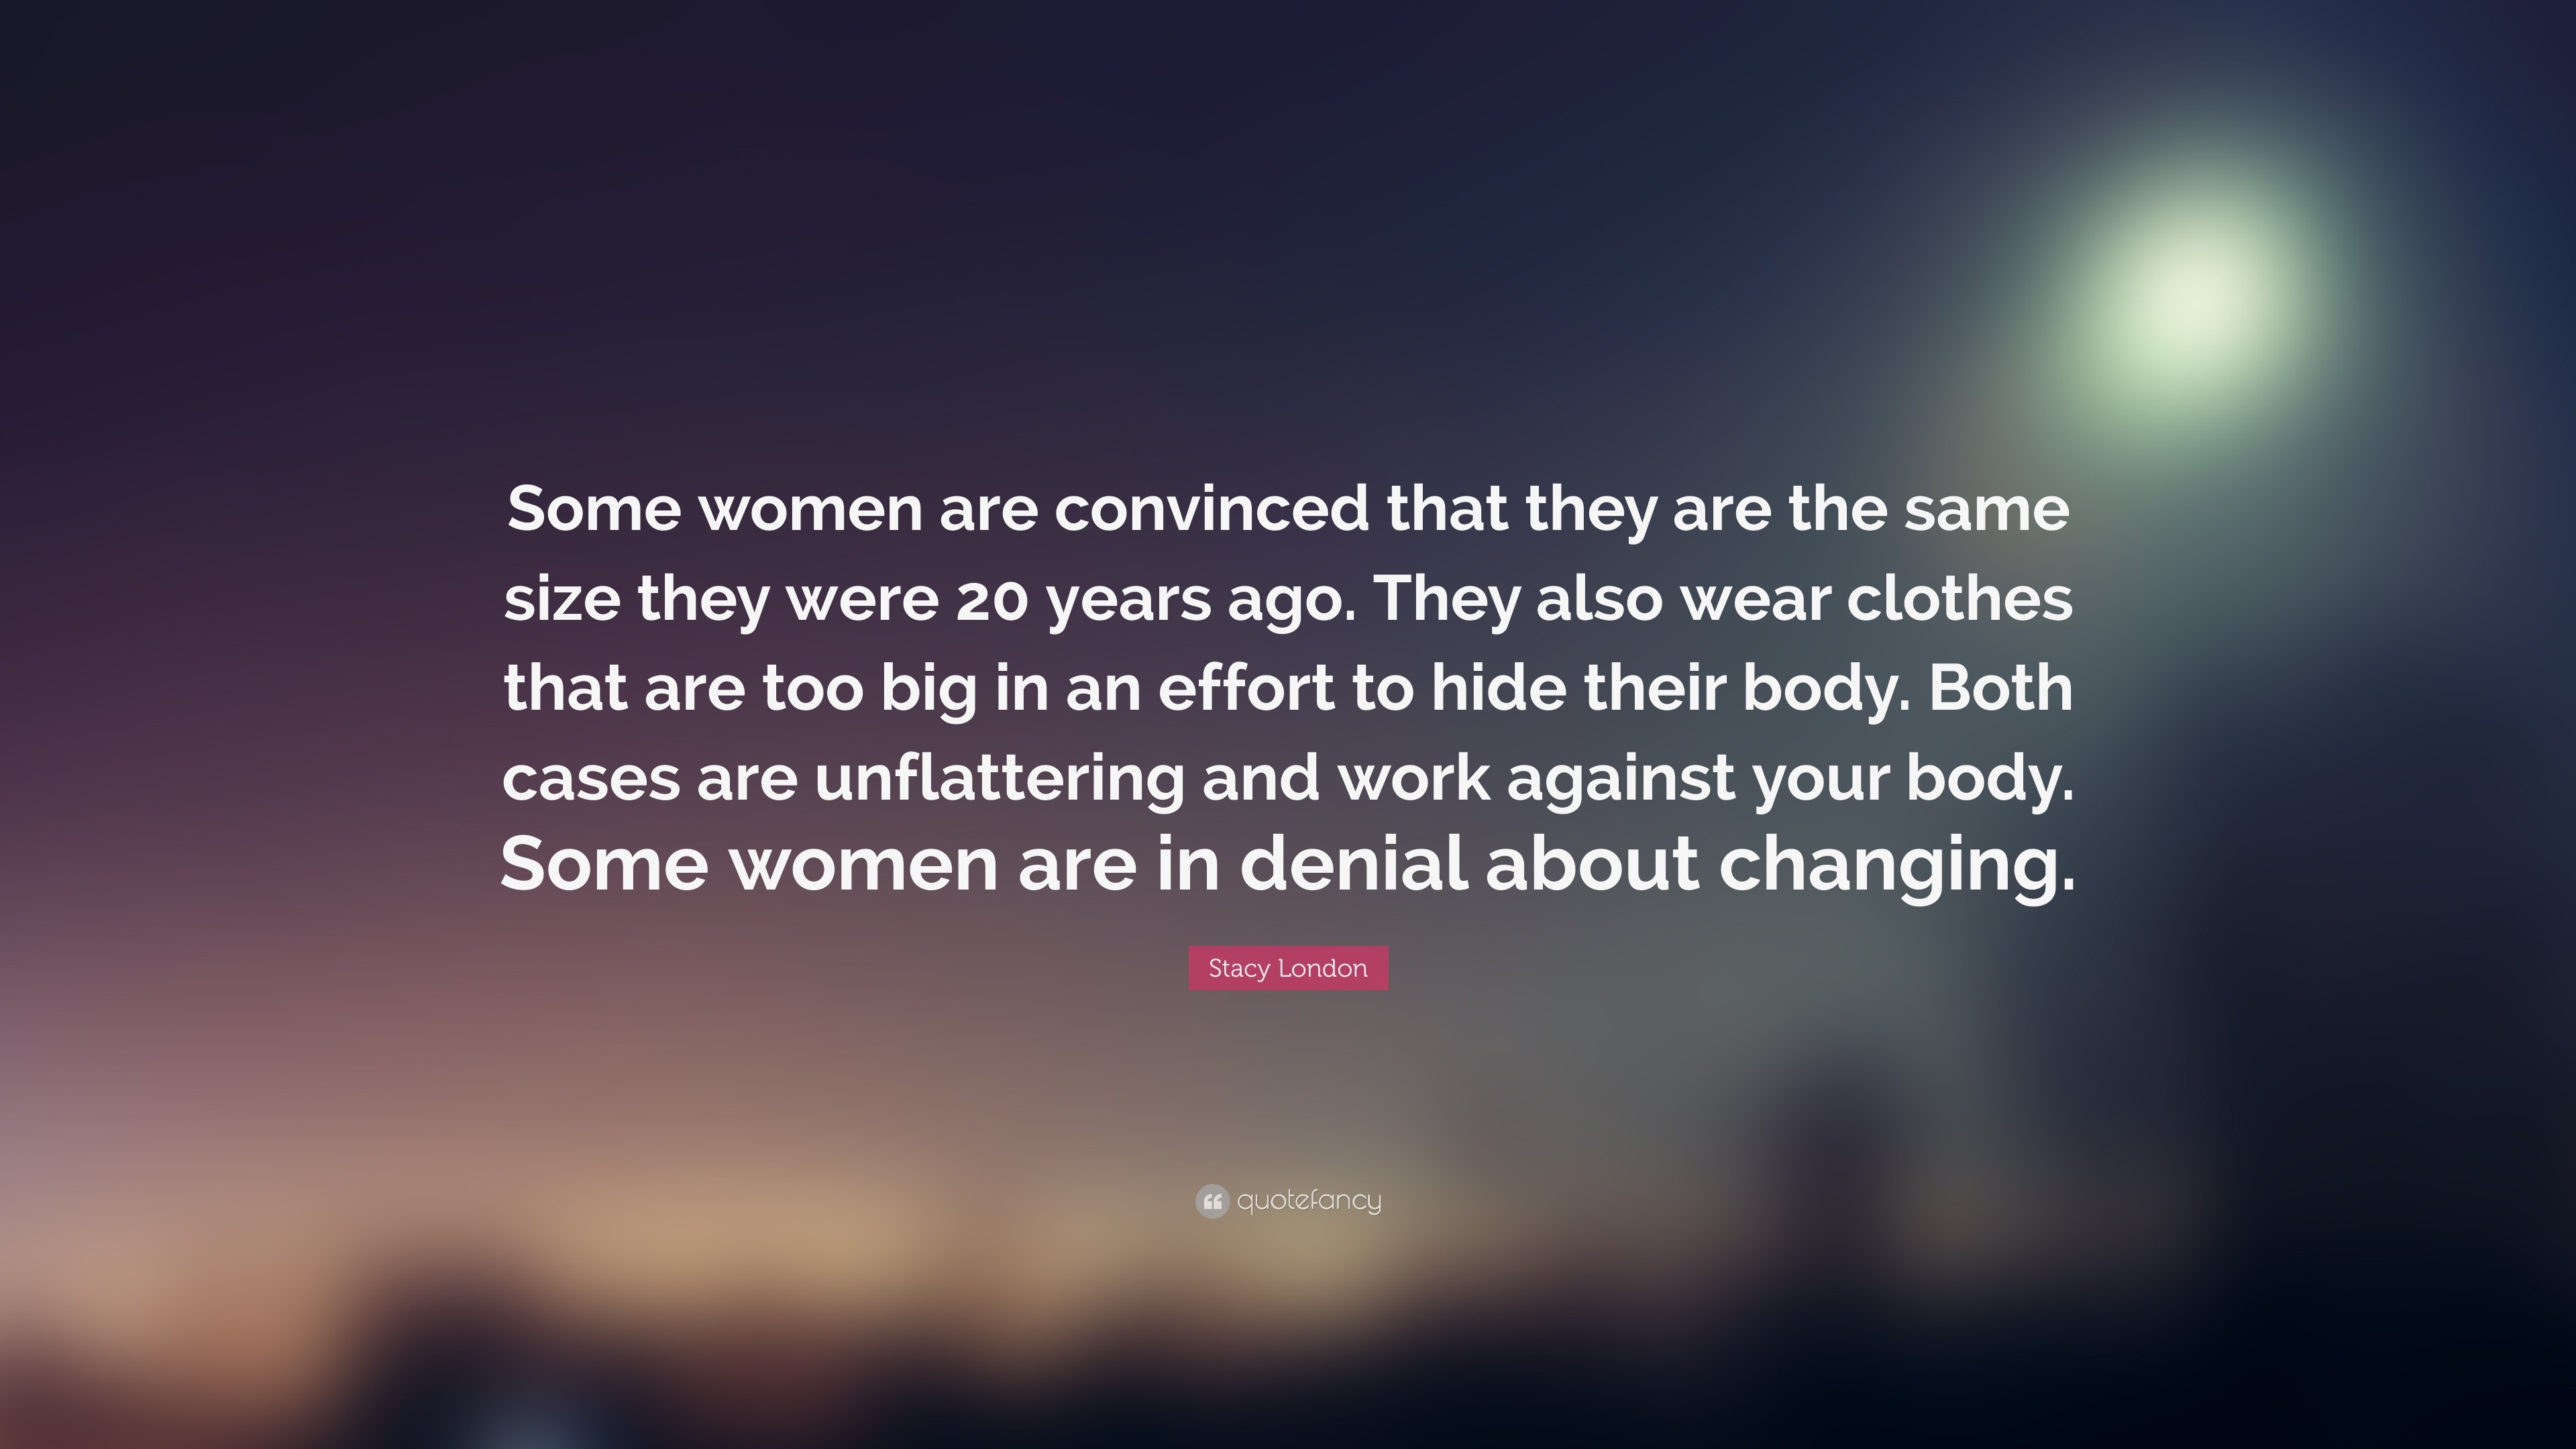 Stacy London Quote: “Some women are convinced that they are the